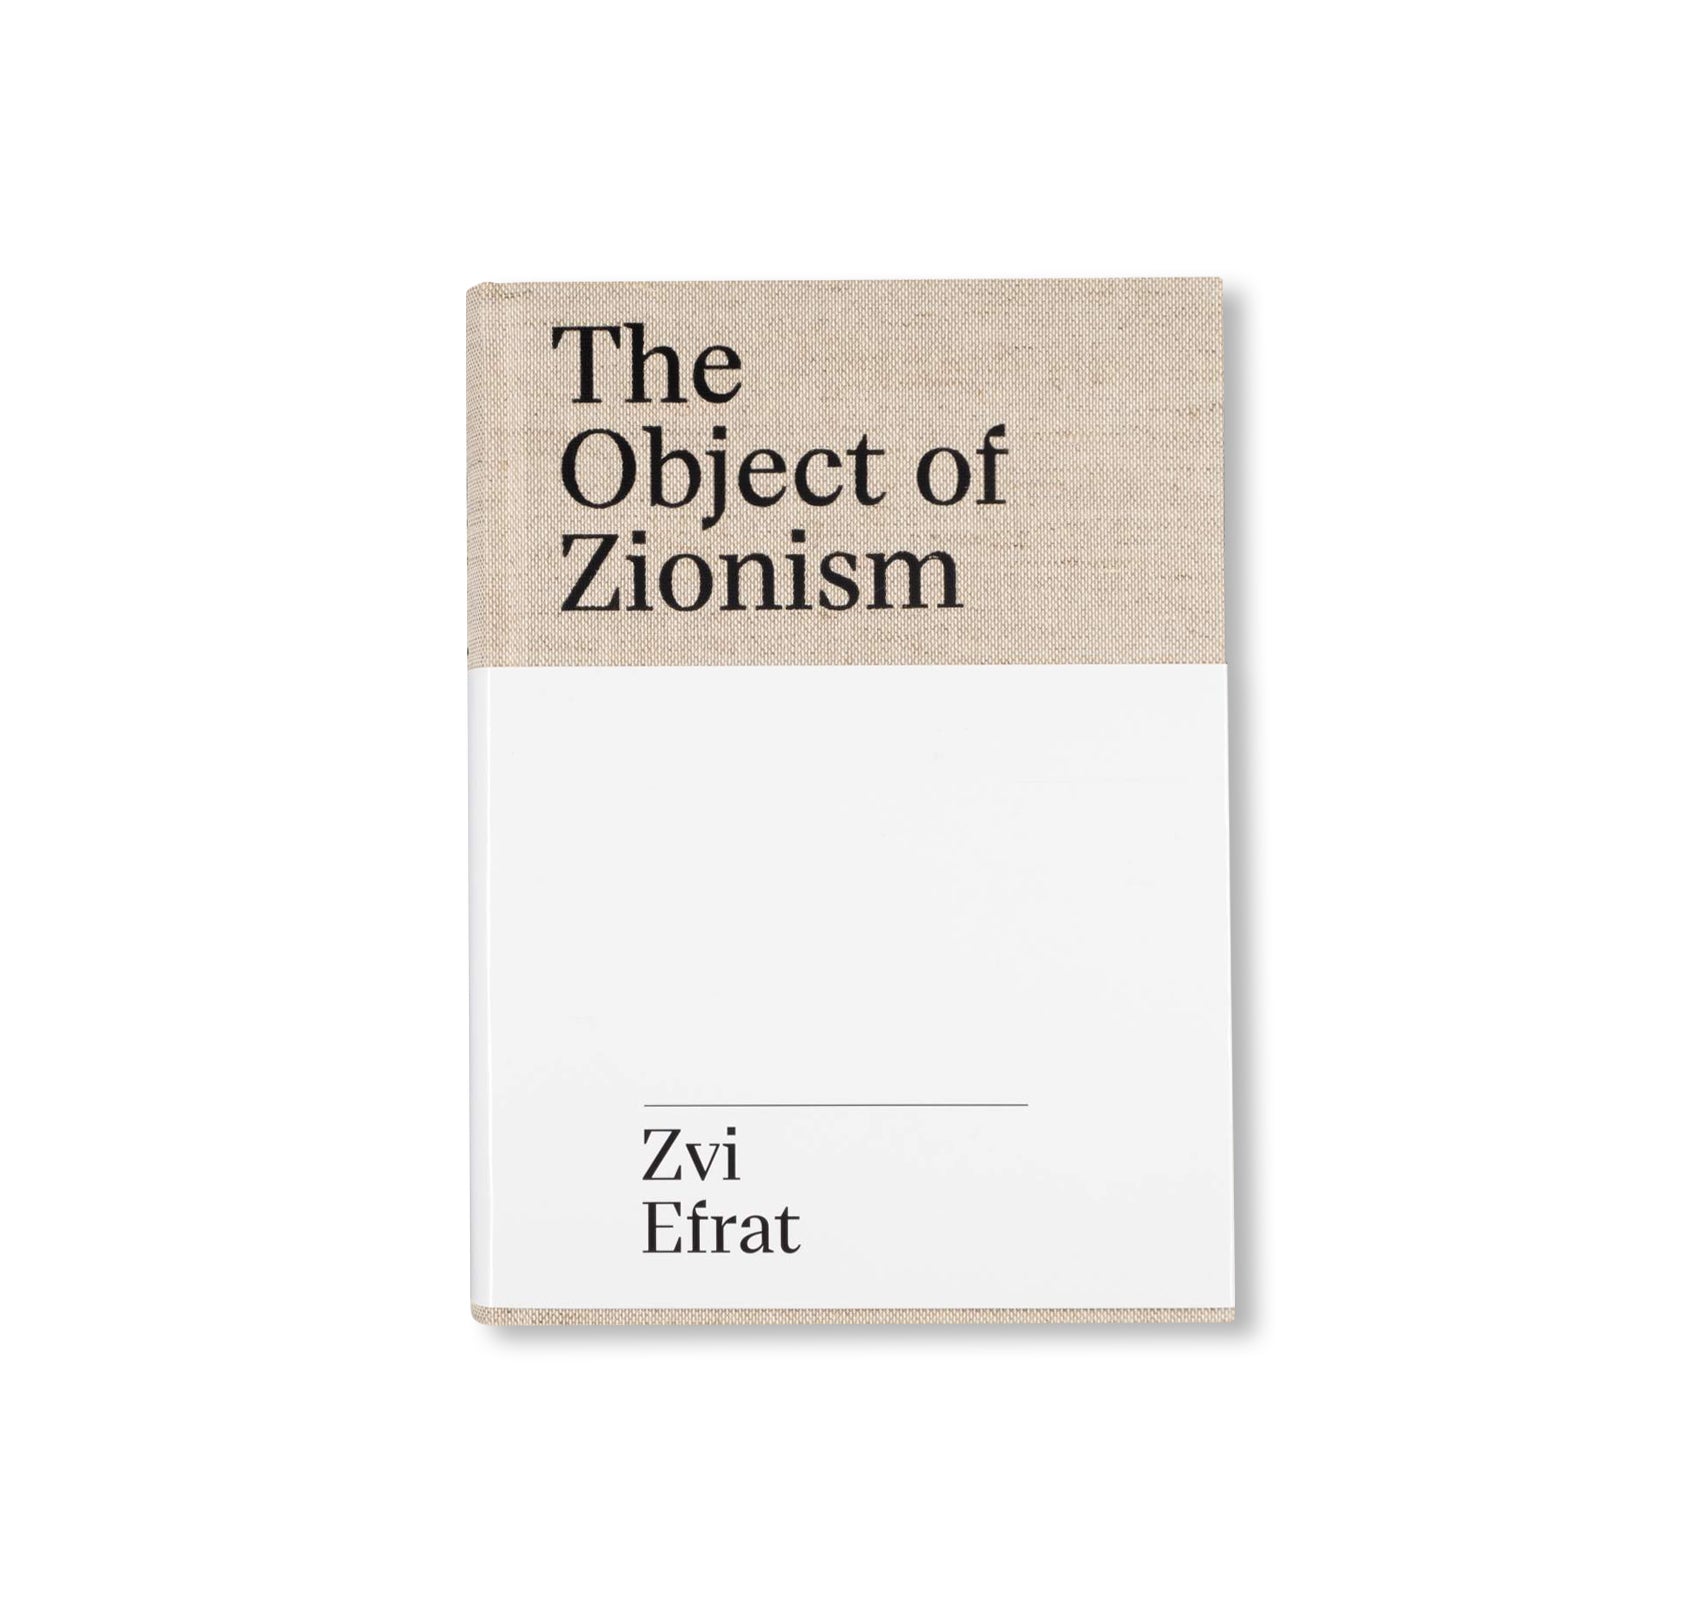 THE OBJECT OF ZIONISM: THE ARCHITECTURE OF ISRAEL by Zvi Efrat